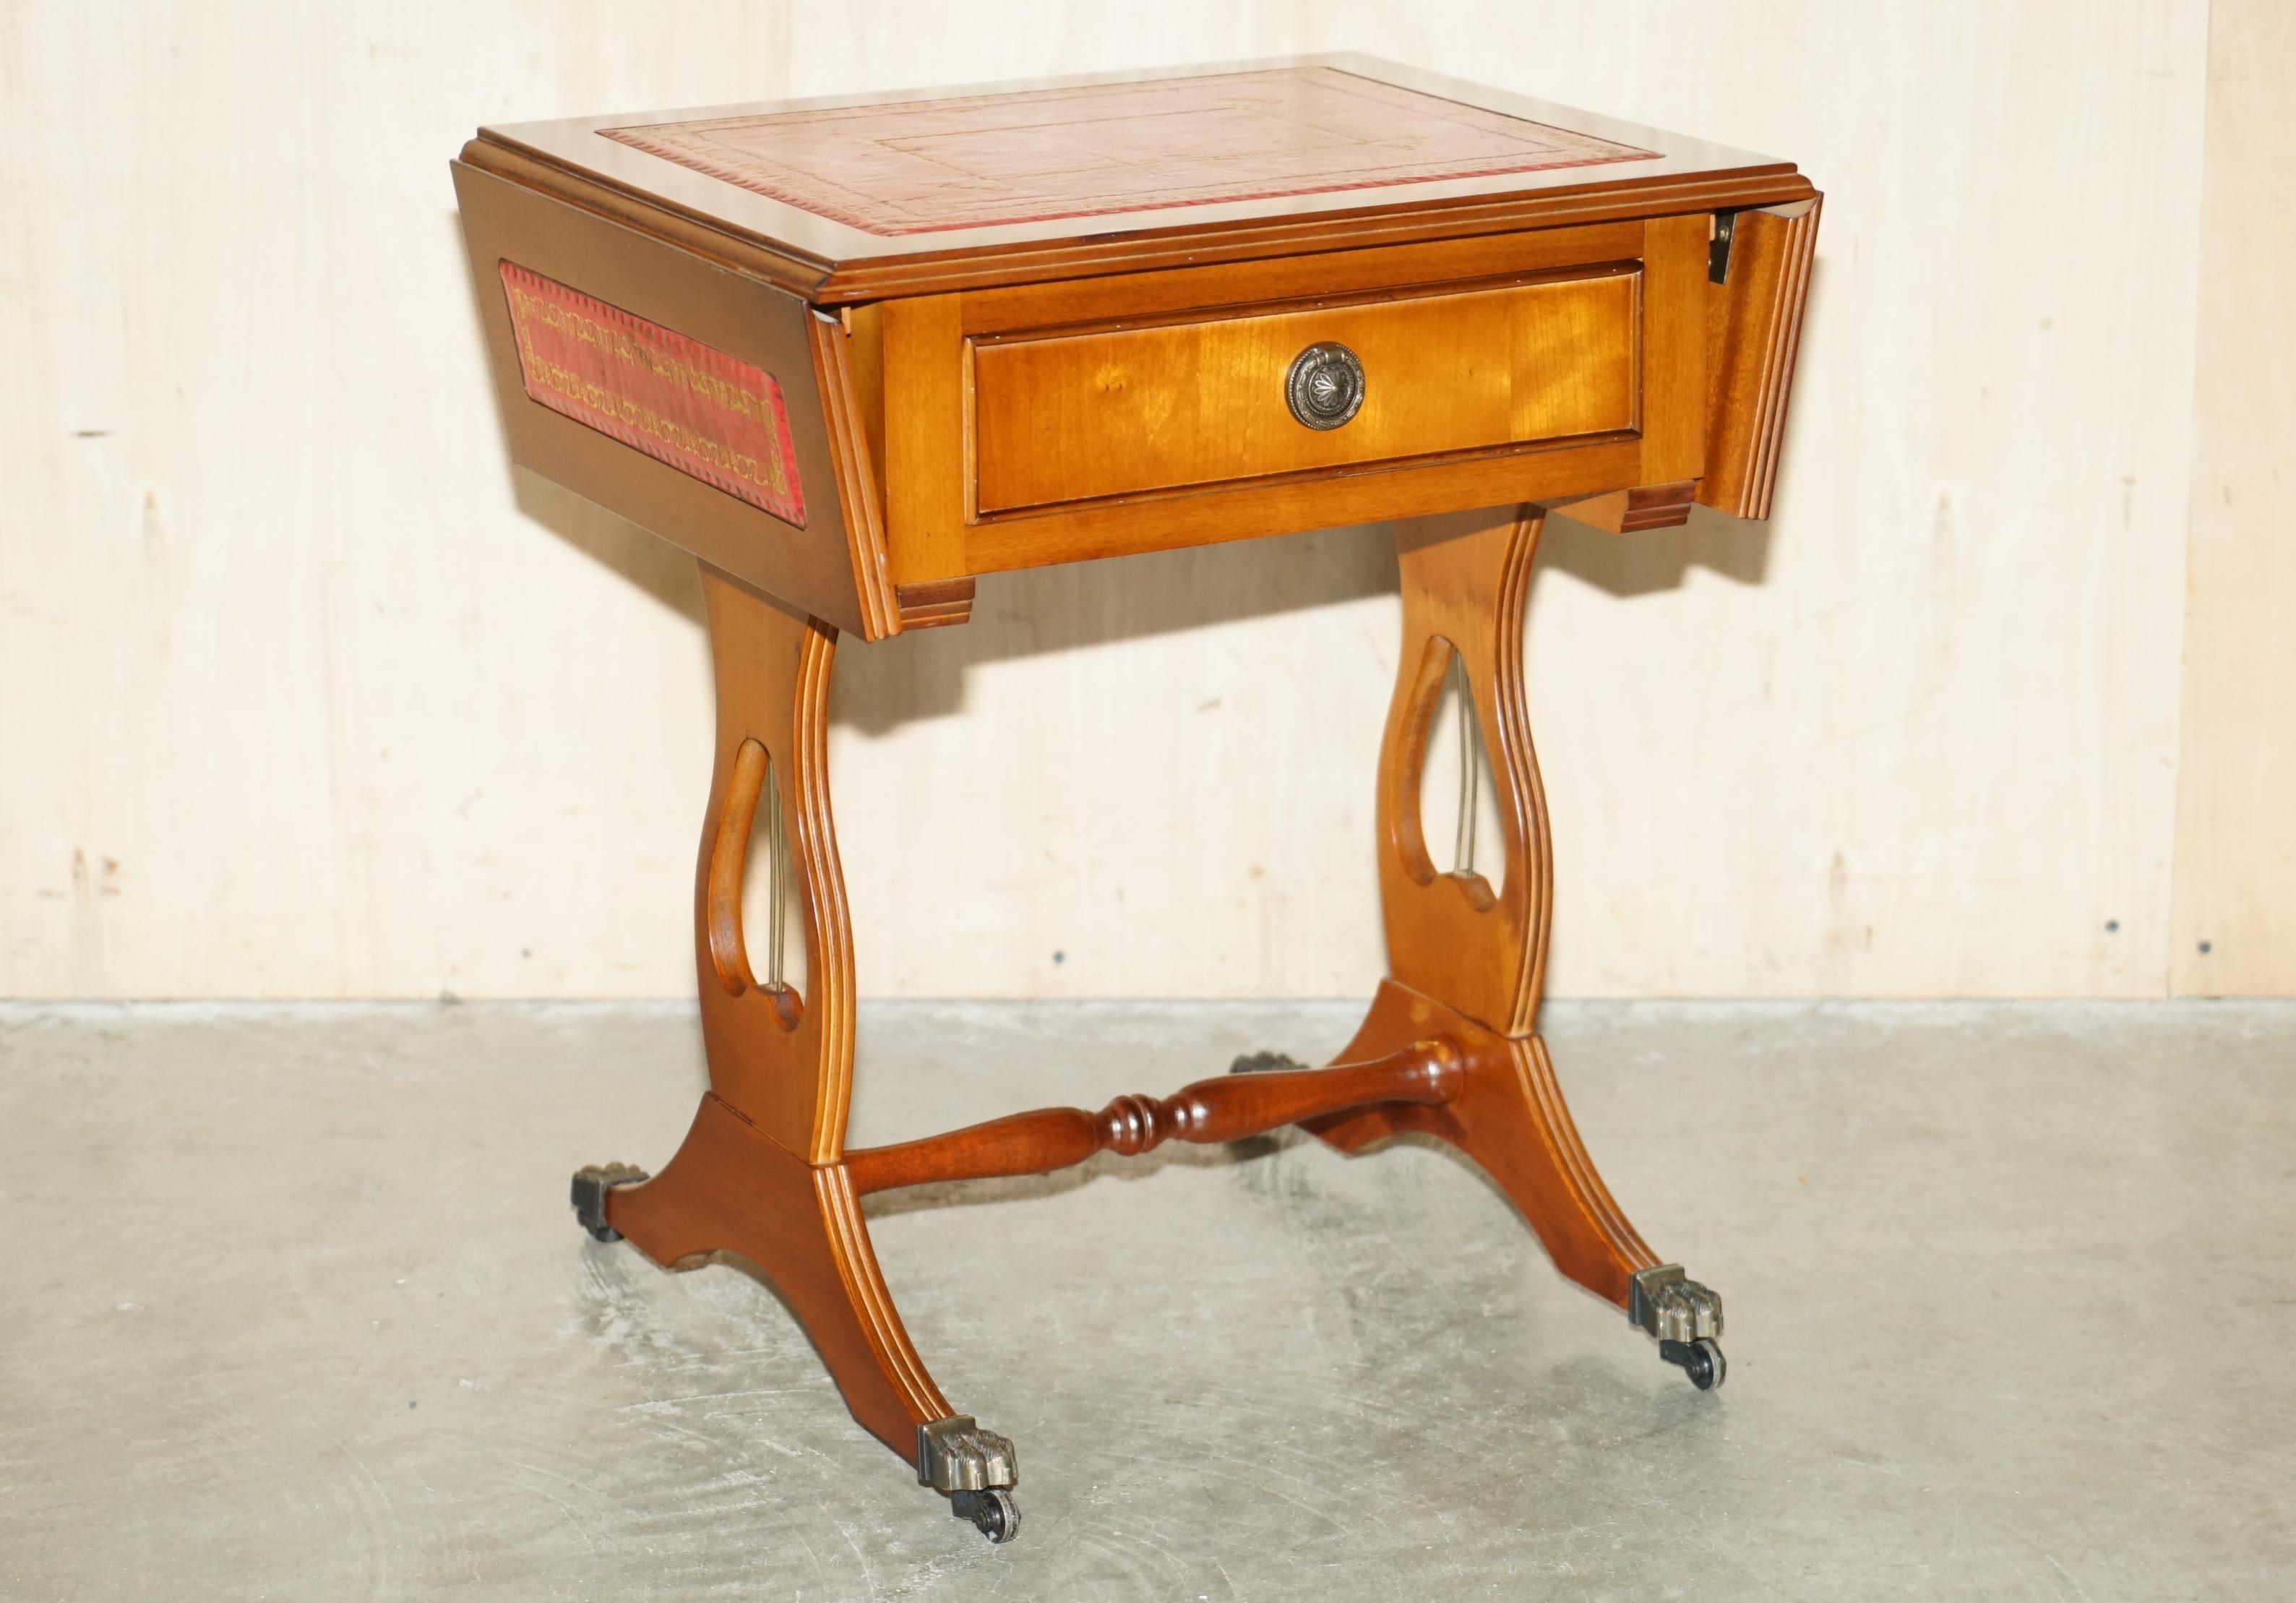 Royal House Antiques

Royal House Antiques is delighted to offer for sale this lovely decorative English single drawer side table with extending oxblood leather top

Please note the delivery fee listed is just a guide, it covers within the M25 only